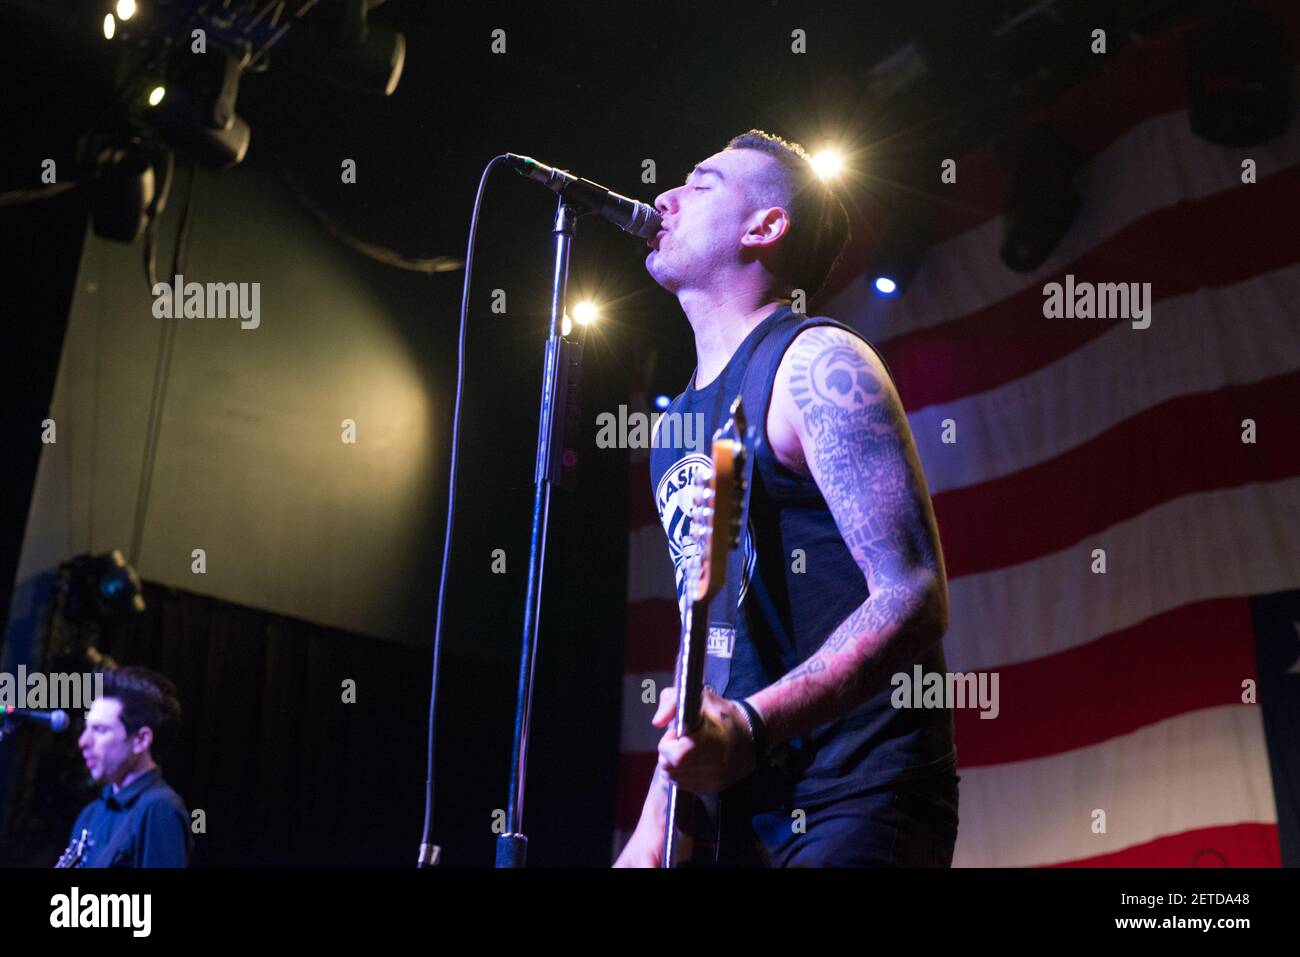 Guitarist Chris Barker of Anti Flag performs in concert at Emo's on Febuary 1, 2017 in Austin, Texas. (Photo by Maggie Boyd) *** Please Use Credit from Credit Field *** Stock Photo